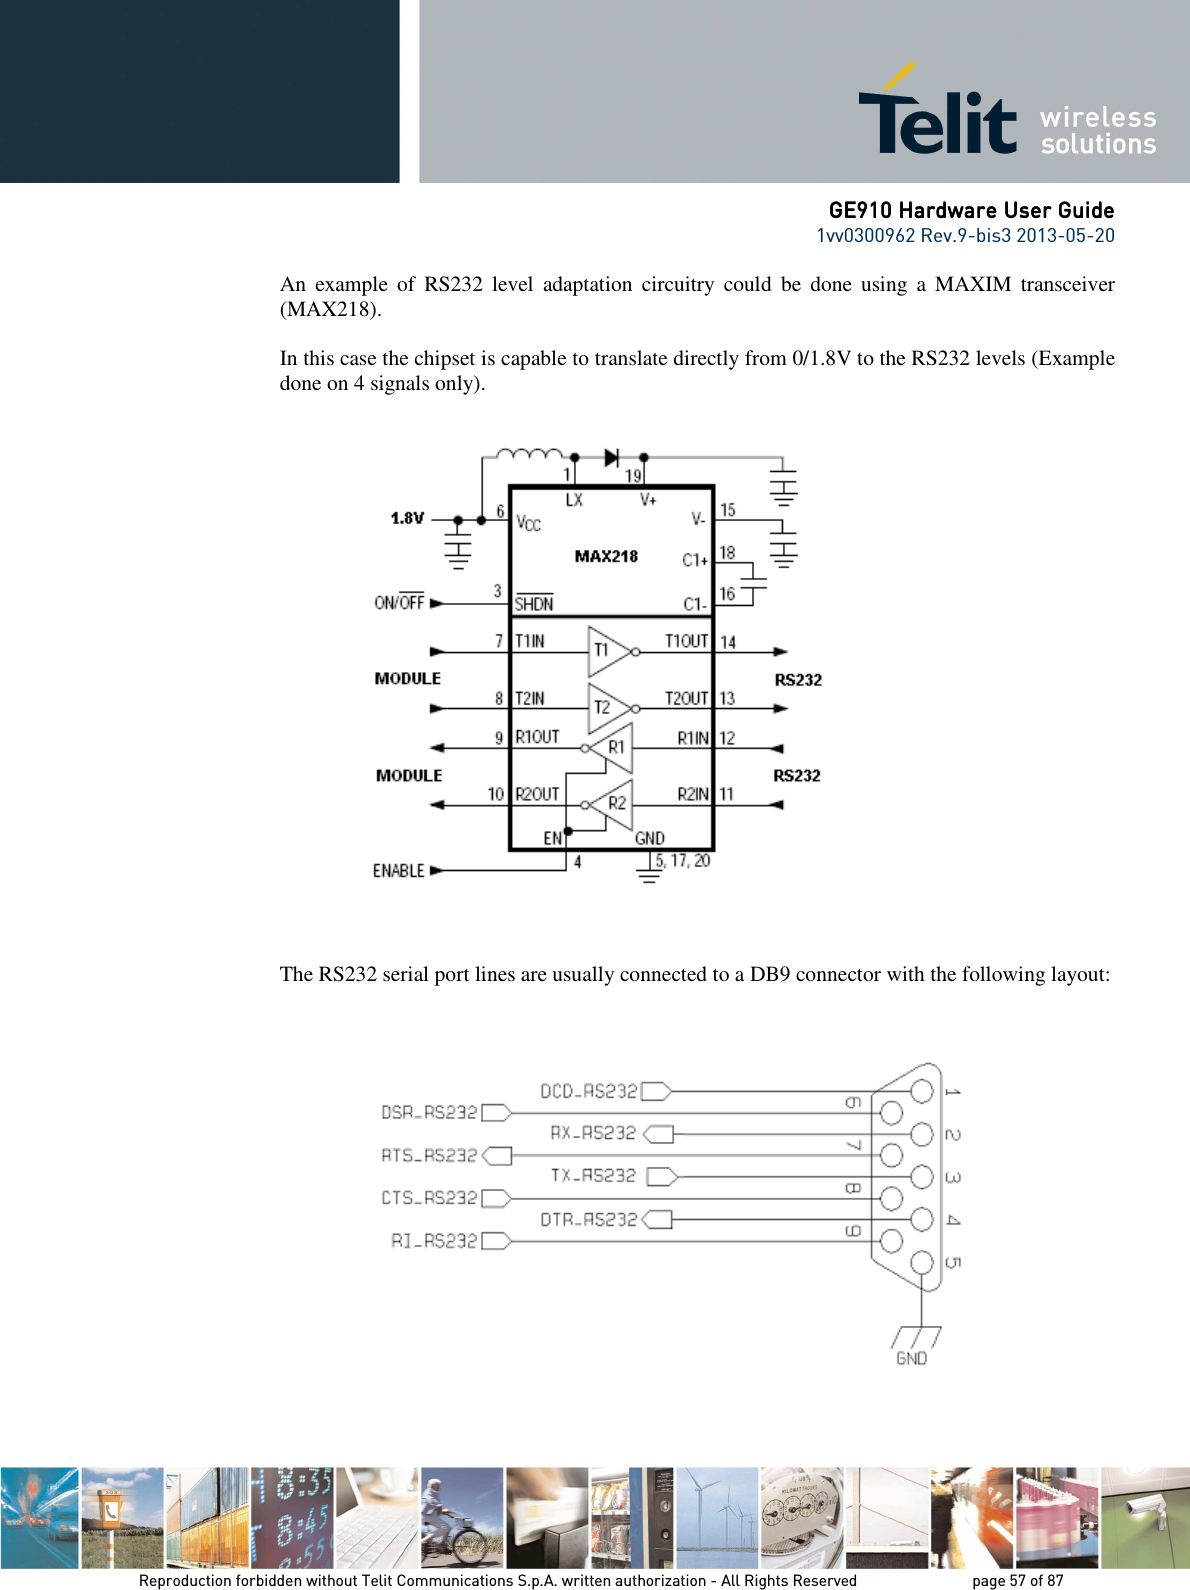      GE910 Hardware User GuideGE910 Hardware User GuideGE910 Hardware User GuideGE910 Hardware User Guide    1vv0300962 Rev.9-bis3 2013-05-20   Reproduction forbidden without Telit Communications S.p.A. written authorization - All Rights Reserved    page 57 of 87 Mod. 0805 2011-07 Rev.2 An  example  of  RS232  level  adaptation  circuitry  could  be  done  using  a  MAXIM  transceiver (MAX218).   In this case the chipset is capable to translate directly from 0/1.8V to the RS232 levels (Example done on 4 signals only).        The RS232 serial port lines are usually connected to a DB9 connector with the following layout:      